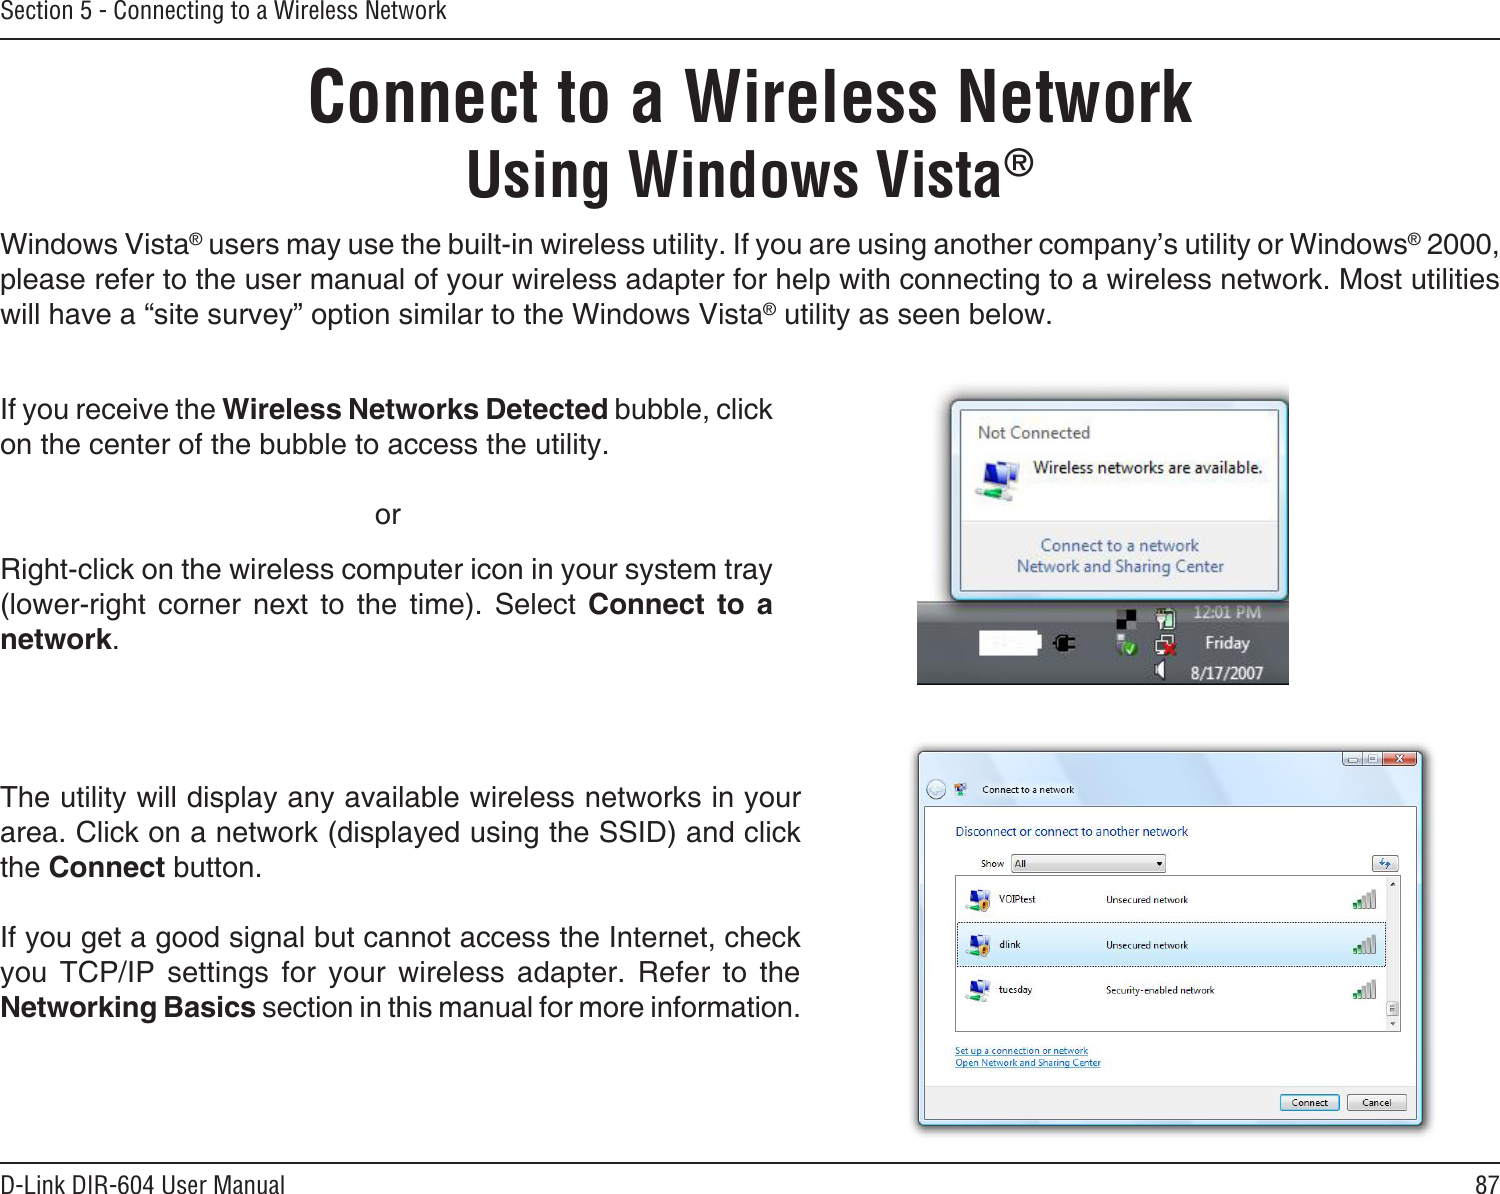 87D-Link DIR-604 User ManualSection 5 - Connecting to a Wireless NetworkConnect to a Wireless NetworkUsing Windows Vista®Windows Vista® users may use the built-in wireless utility. If you are using another company’s utility or Windows® 2000, please refer to the user manual of your wireless adapter for help with connecting to a wireless network. Most utilities will have a “site survey” option similar to the Windows Vista® utility as seen below.Right-click on the wireless computer icon in your system tray (lower-right  corner  next  to  the  time).  Select  Connect  to  a network.If you receive the Wireless Networks Detected bubble, click on the center of the bubble to access the utility.     orThe utility will display any available wireless networks in your area. Click on a network (displayed using the SSID) and click the Connect button.If you get a good signal but cannot access the Internet, check you  TCP/IP  settings  for  your  wireless  adapter.  Refer  to  the Networking Basics section in this manual for more information.